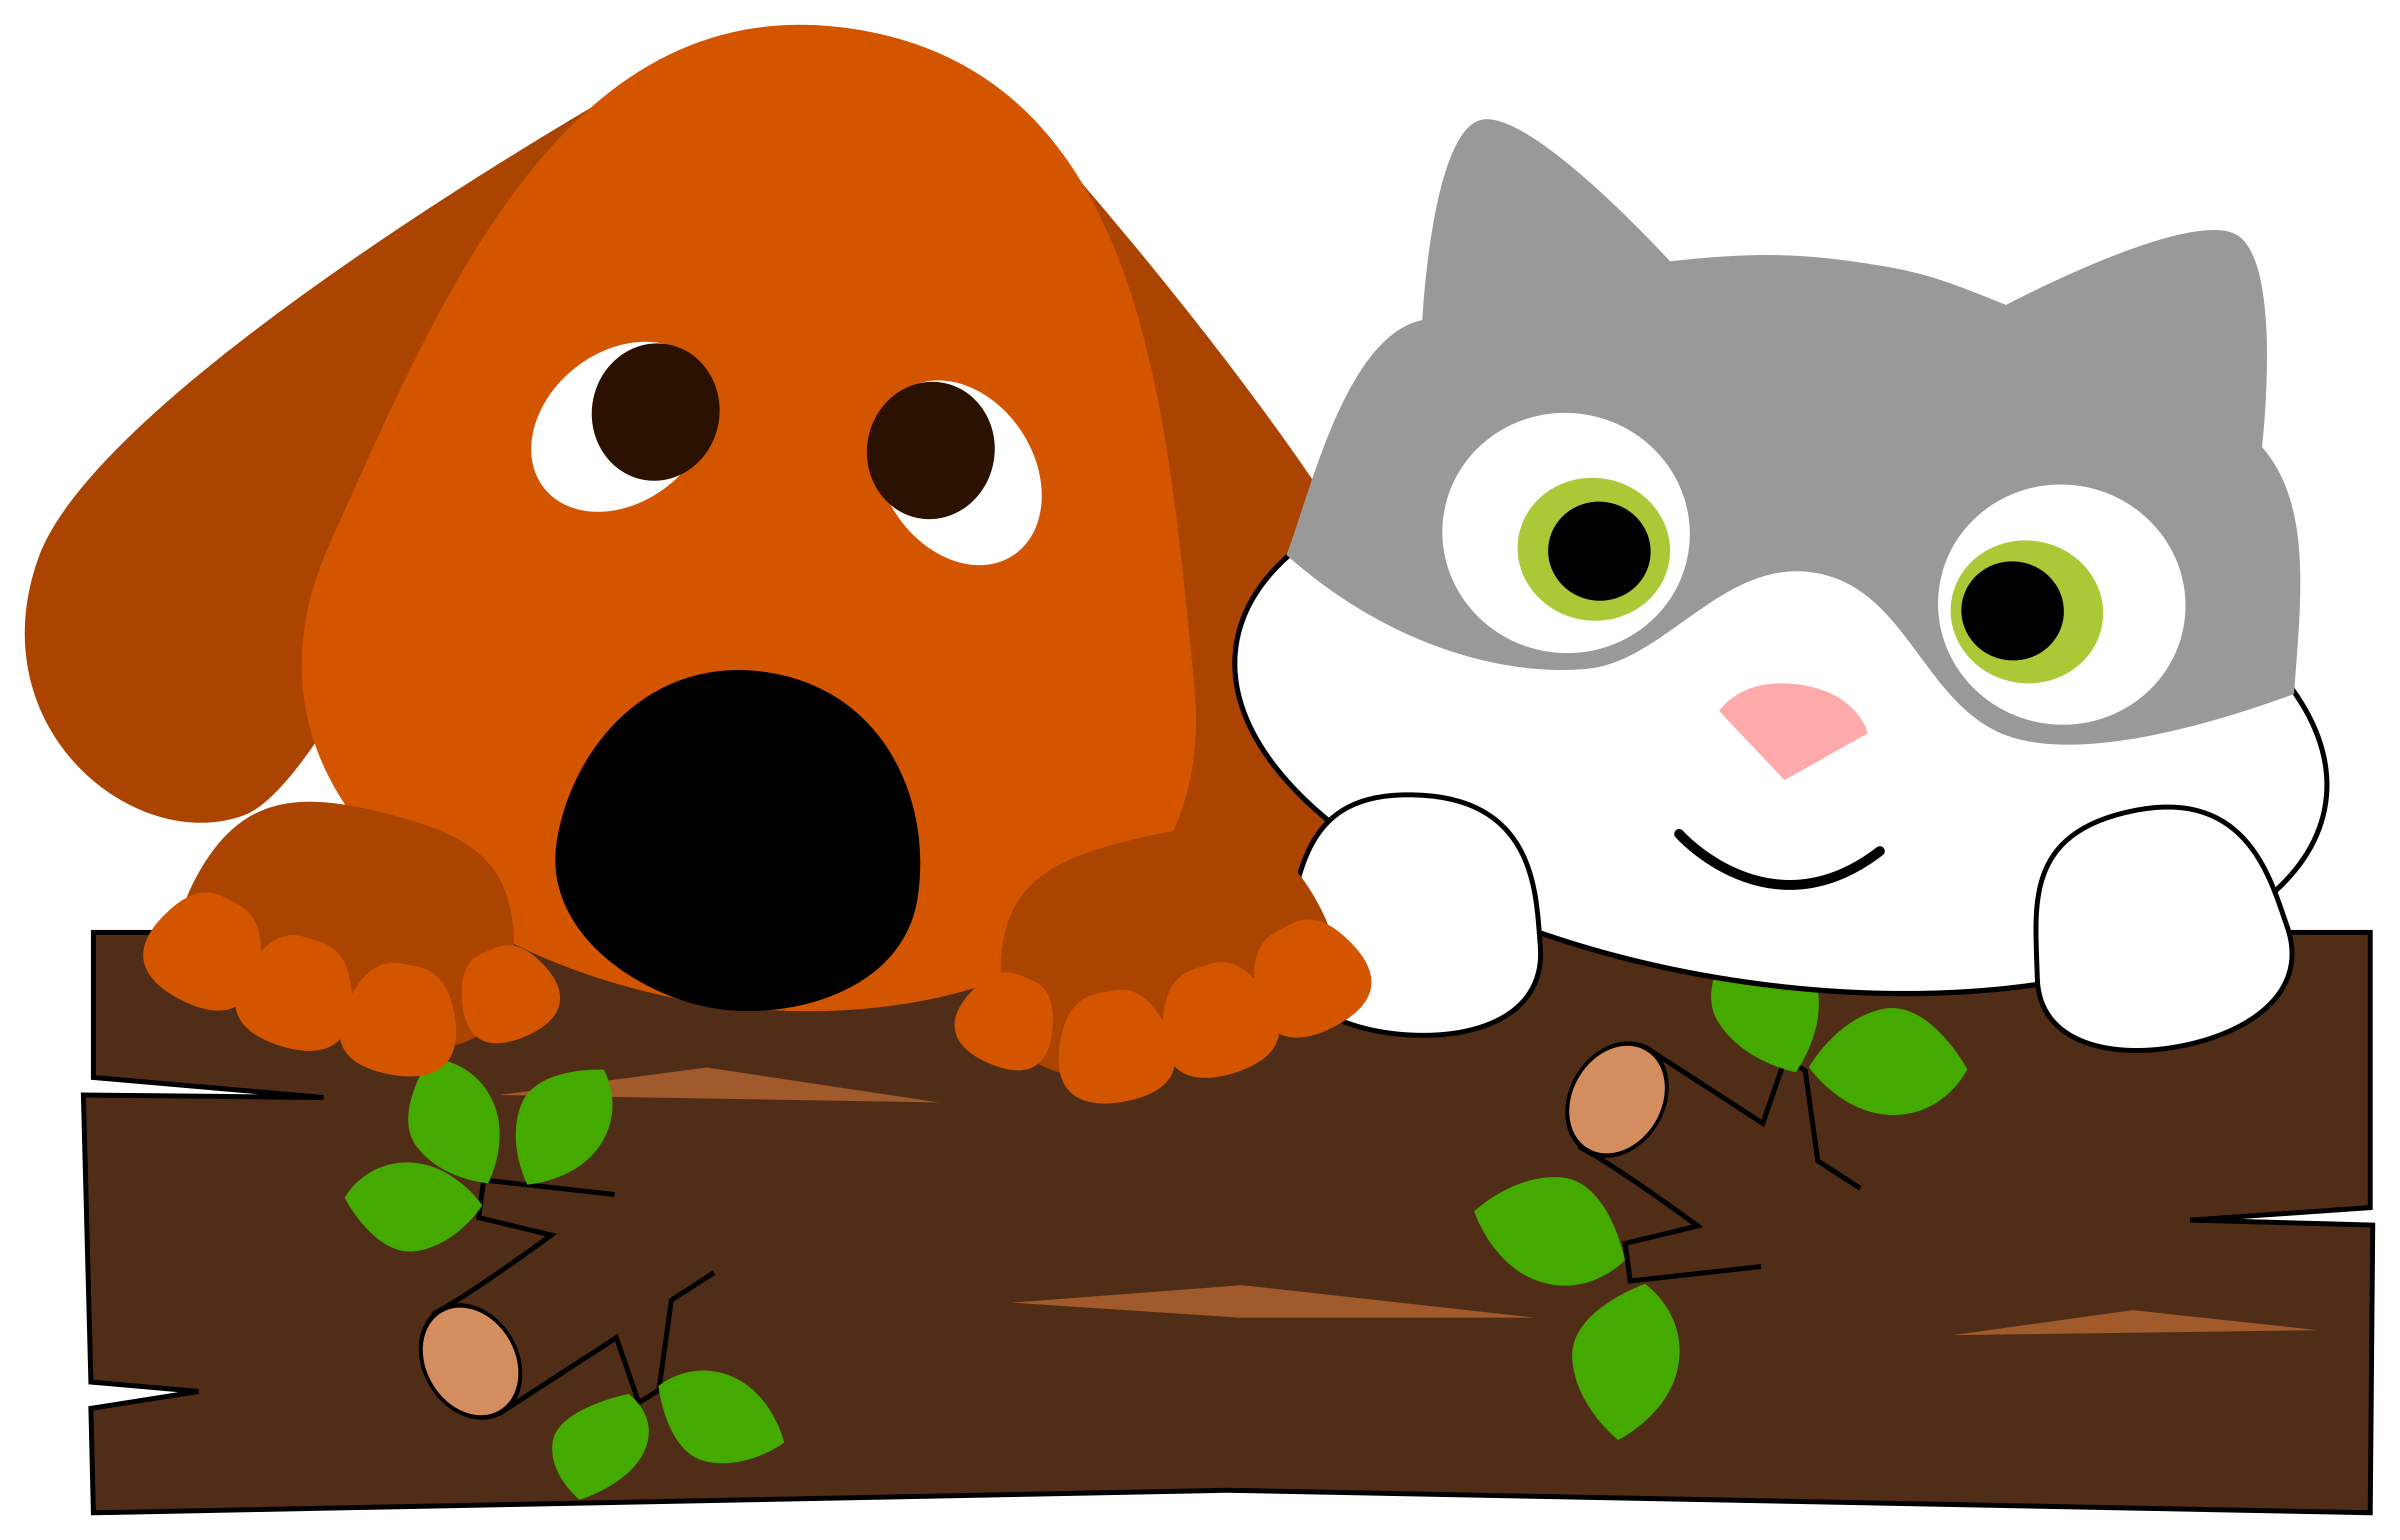 Dog and Cat Behind Tree Trunk vector clipart image Free